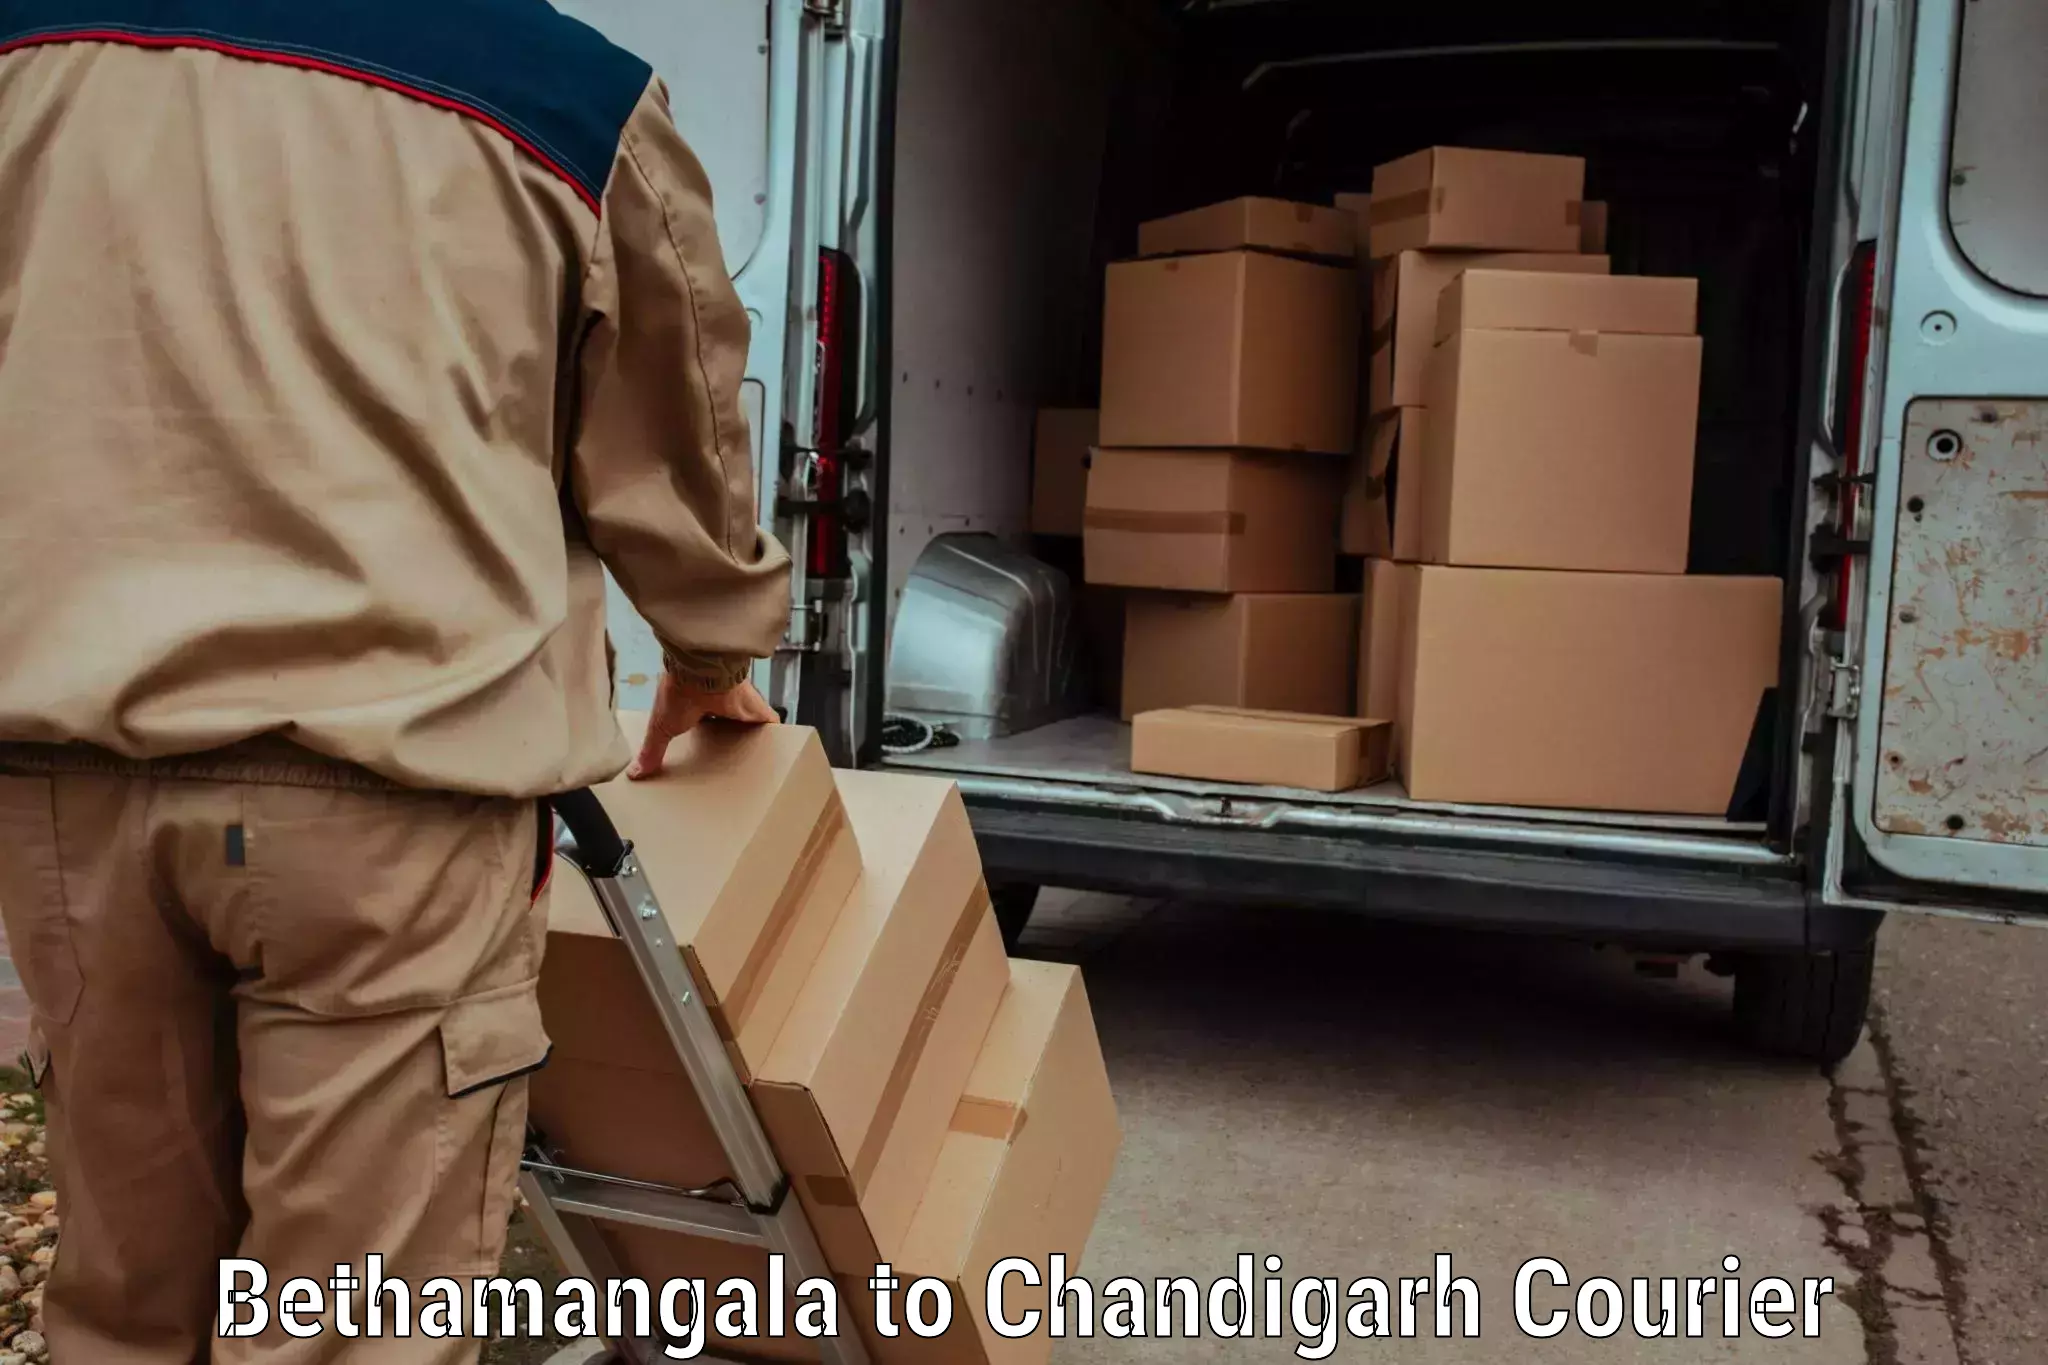 Courier service comparison Bethamangala to Chandigarh